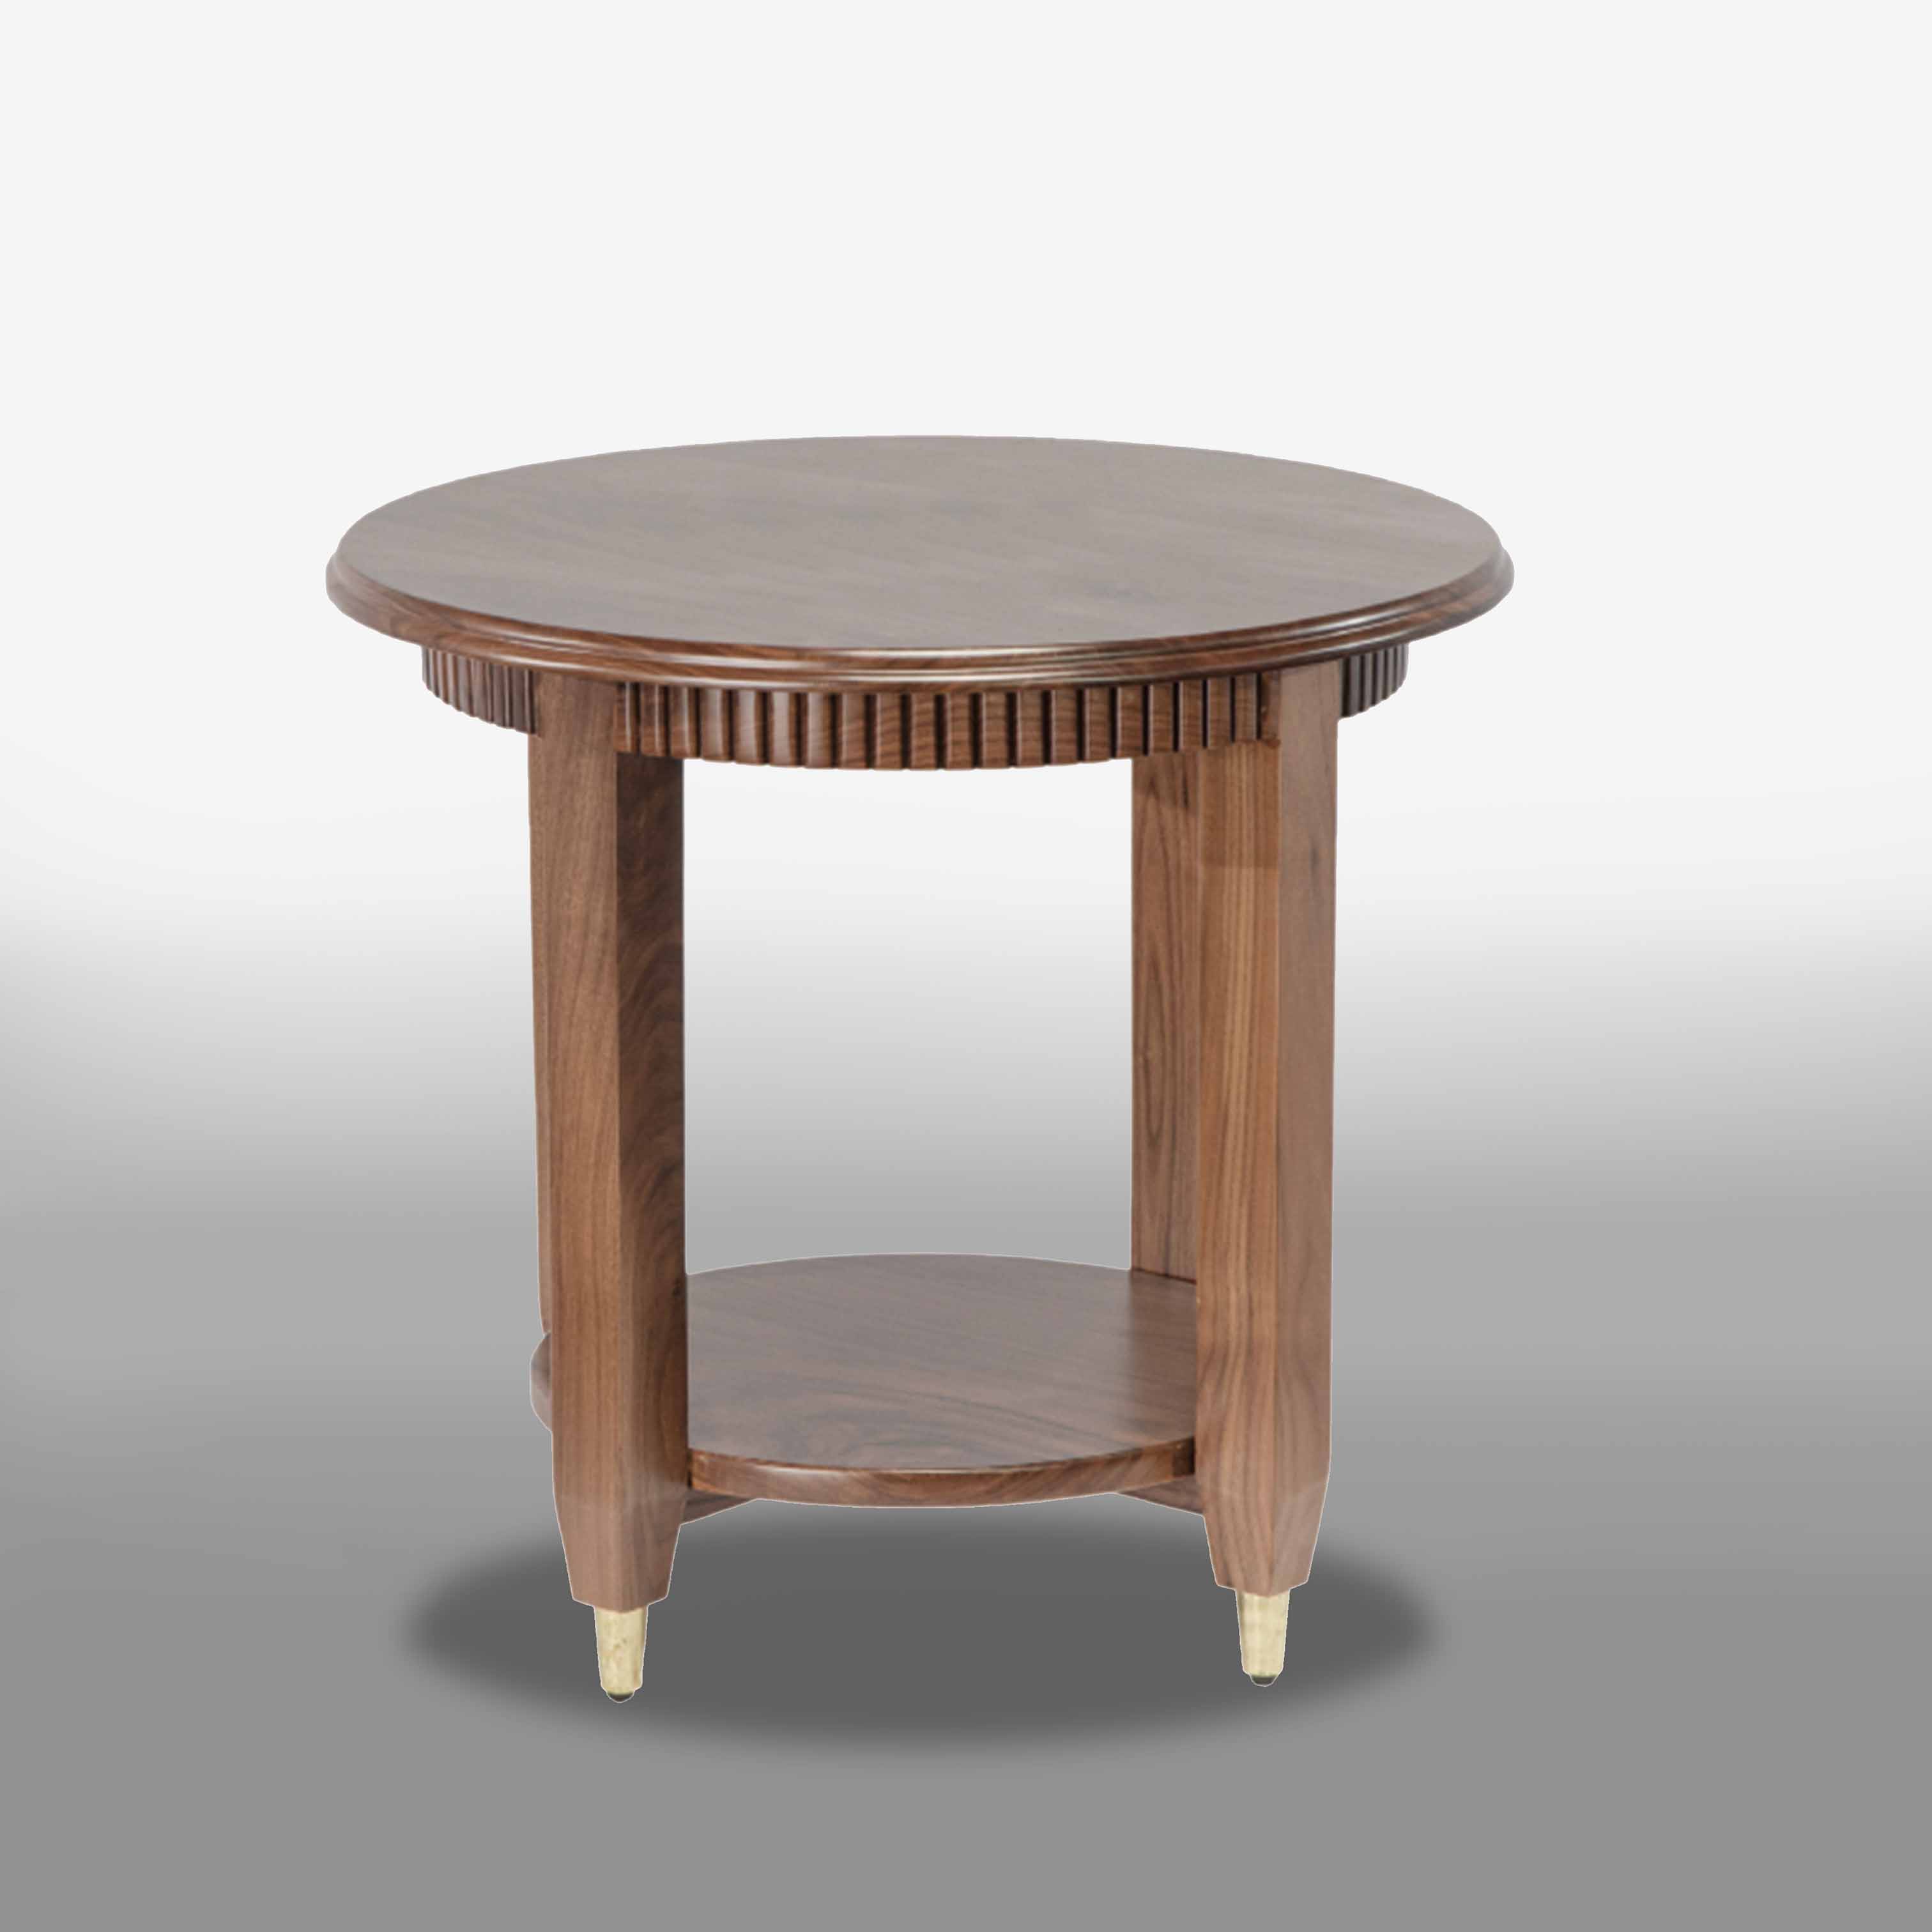 Noble round wooden table - B56LHFU